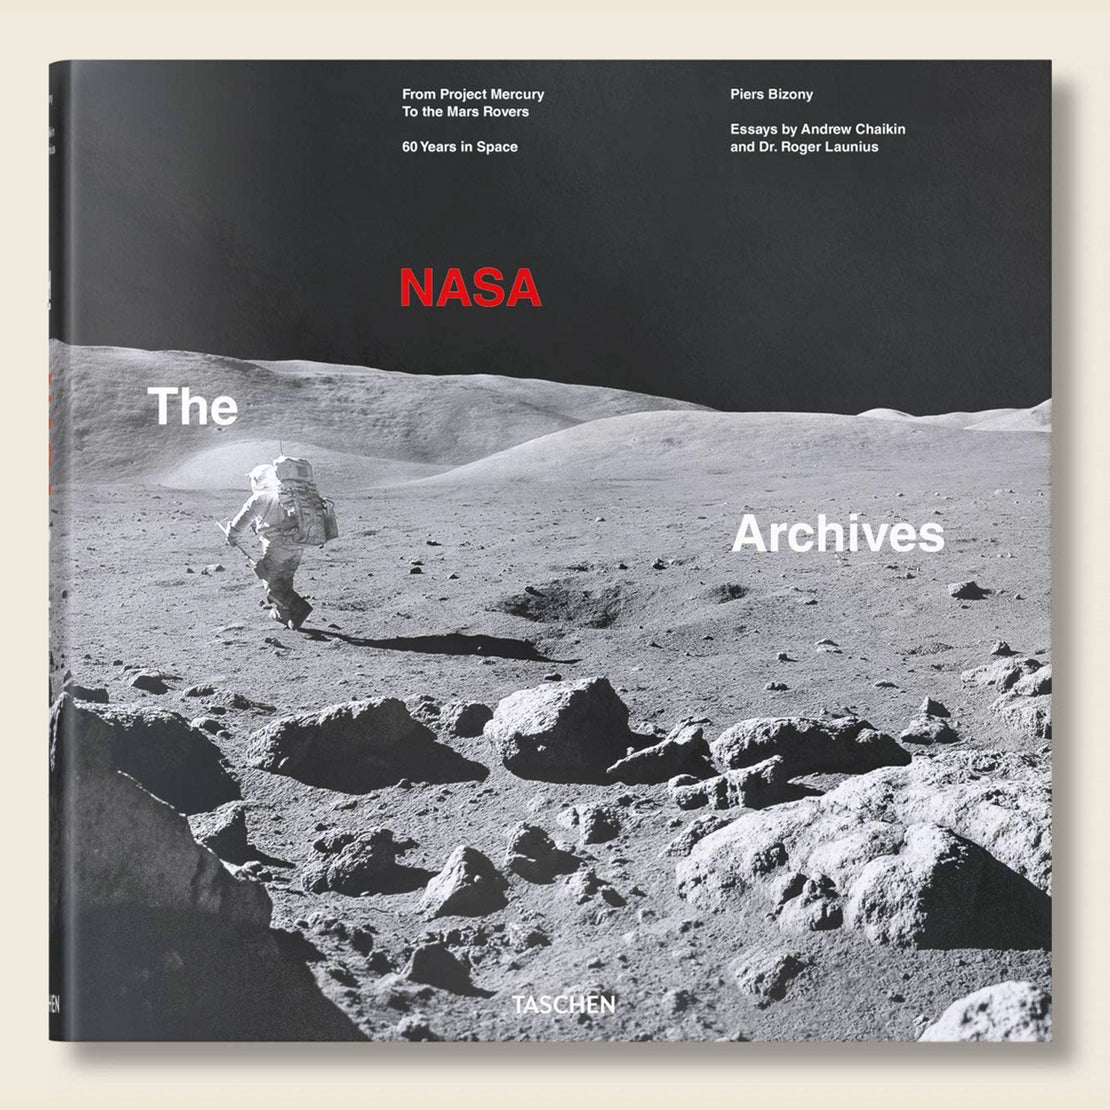 Bookstore The NASA Archives: 60 Years in Space - Piers Bizony